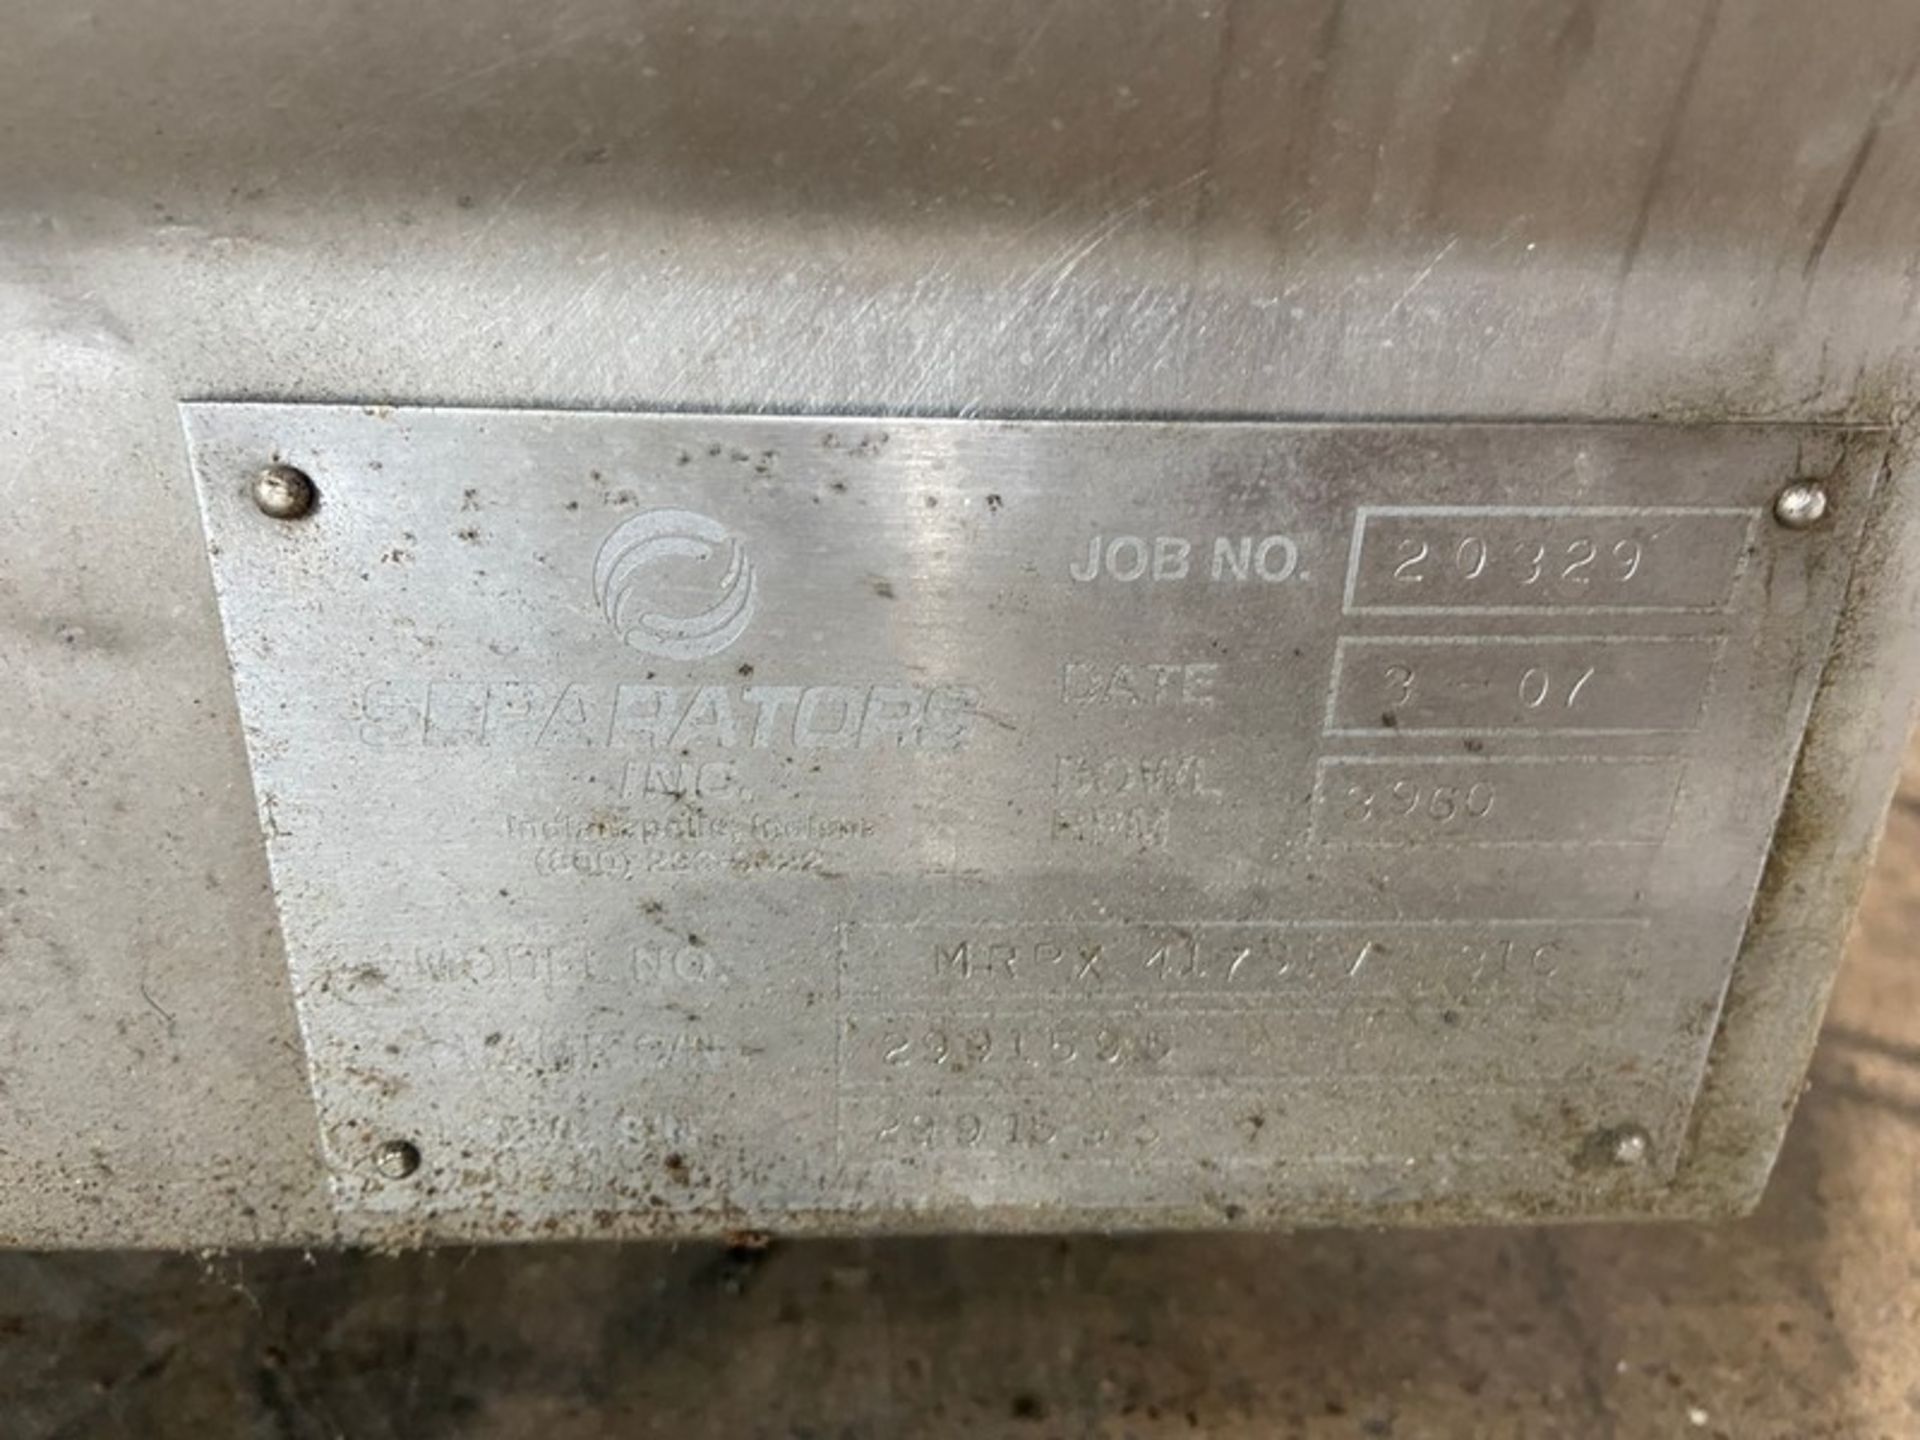 Separator Inc. S/S Separator,M/N MRPX4179IV316, S/N 2991595, Bowl RPM 3960(INV#88847) (Located @ the - Image 12 of 12